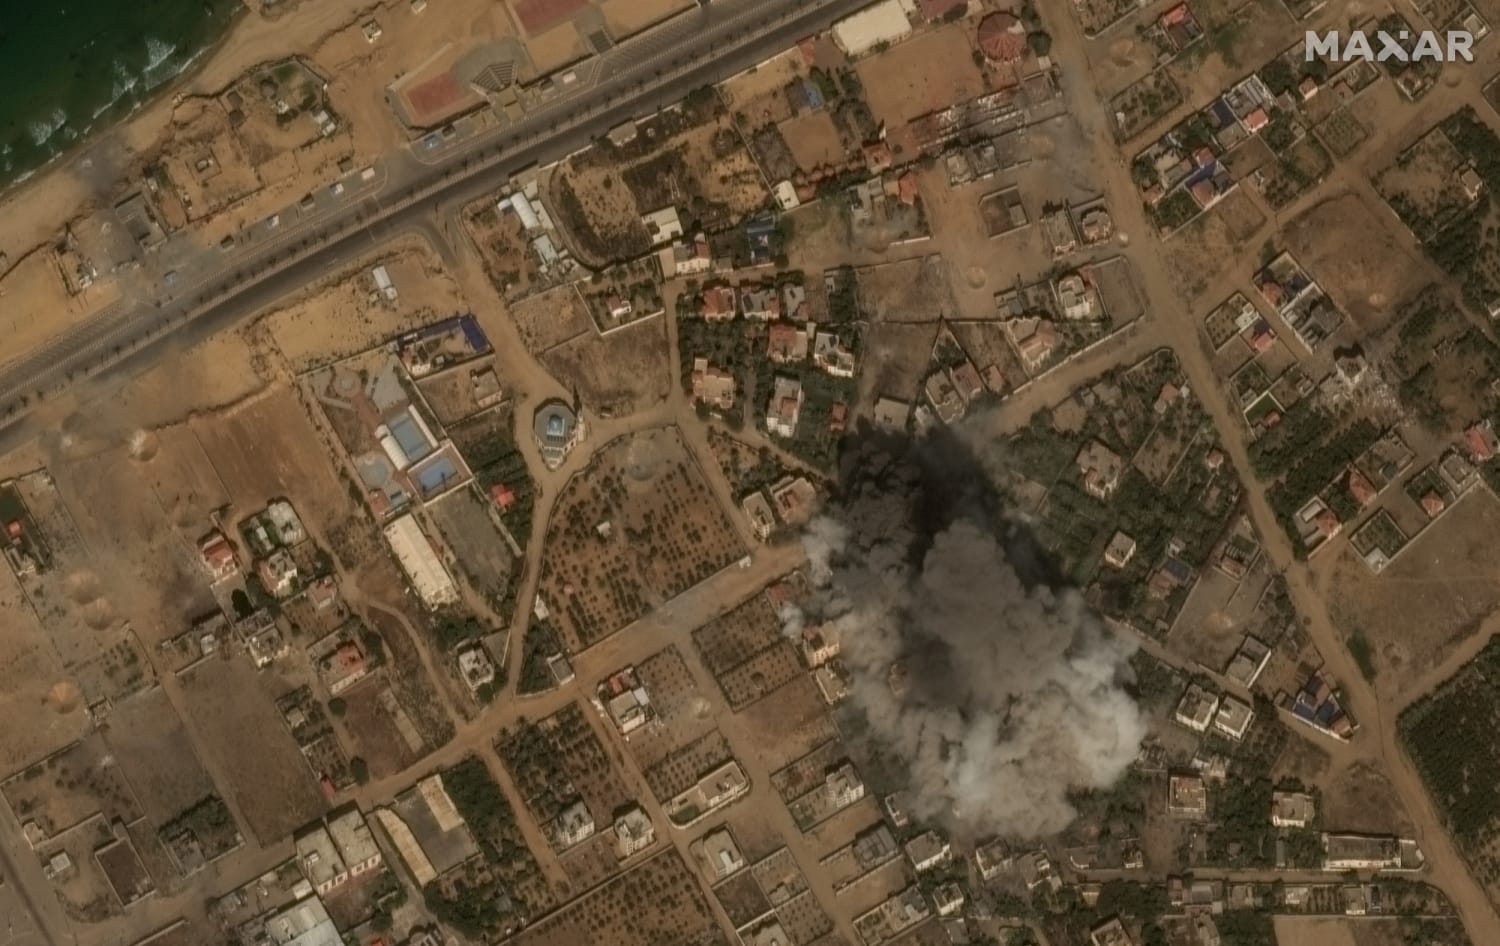 Satellite images show the devastation in Gaza after Israeli airstrikes